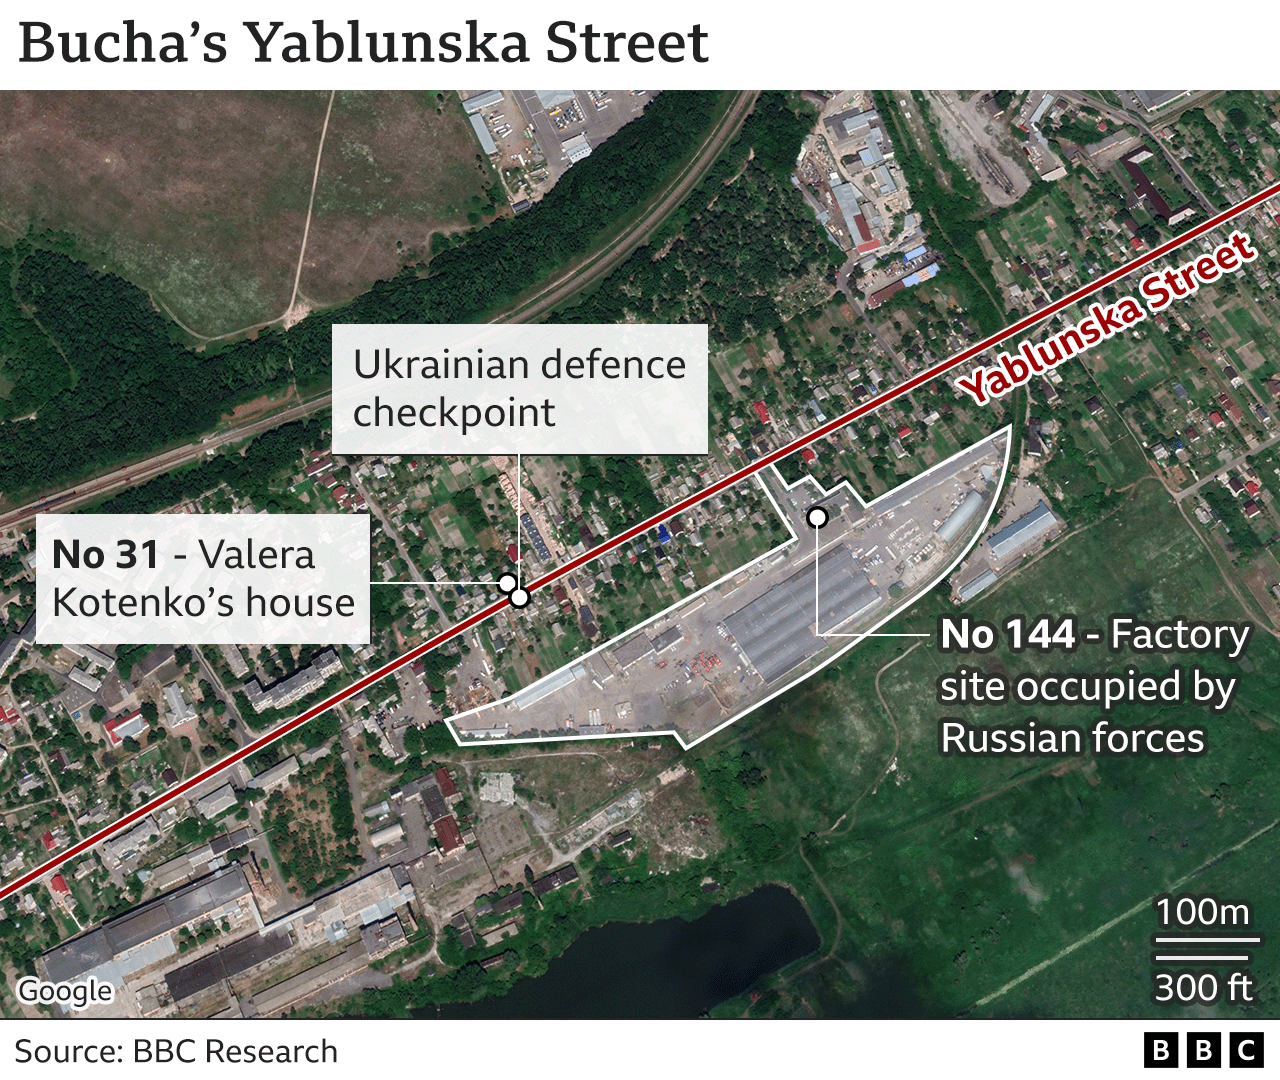 Map showing what happened at 31 and 144 Yablunska Street